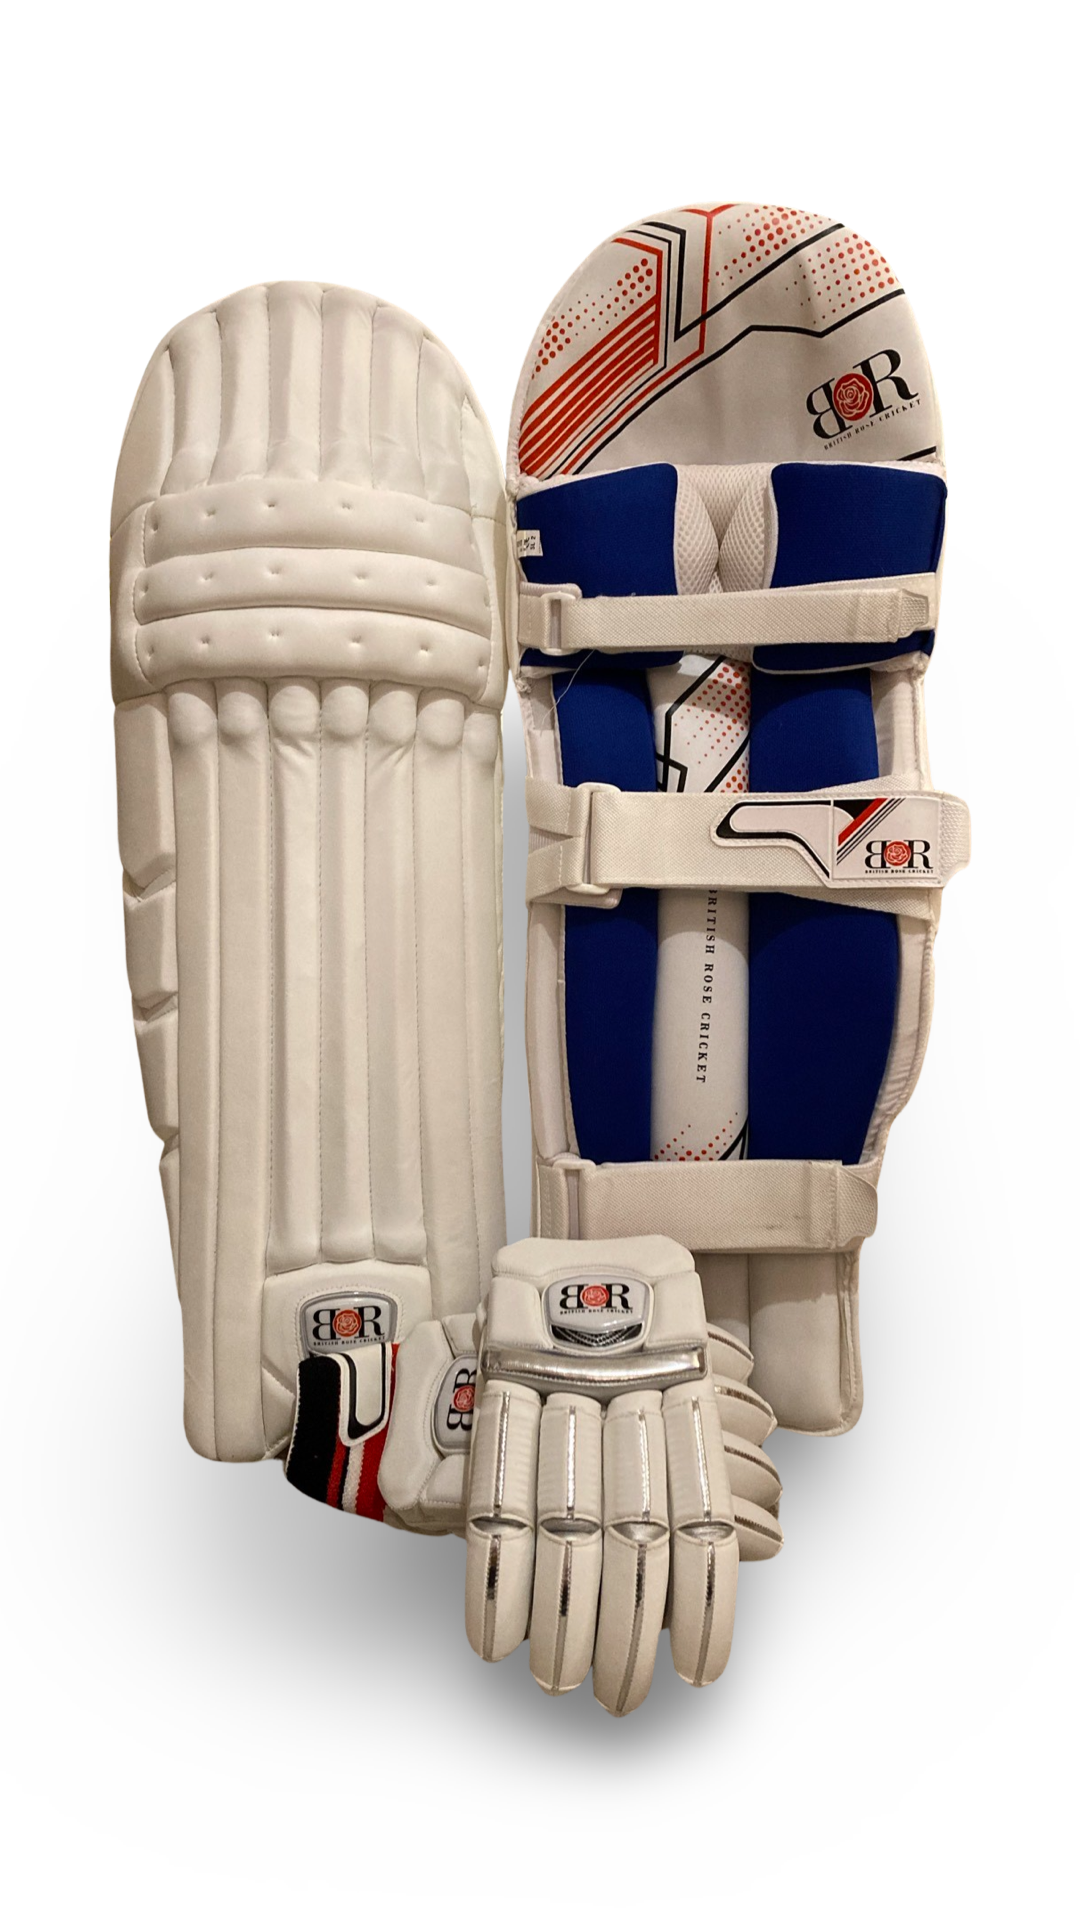 2023 TRADITIONAL DUO (BATTING PADS & BATTING GLOVES) - LEFT HAND ONLY